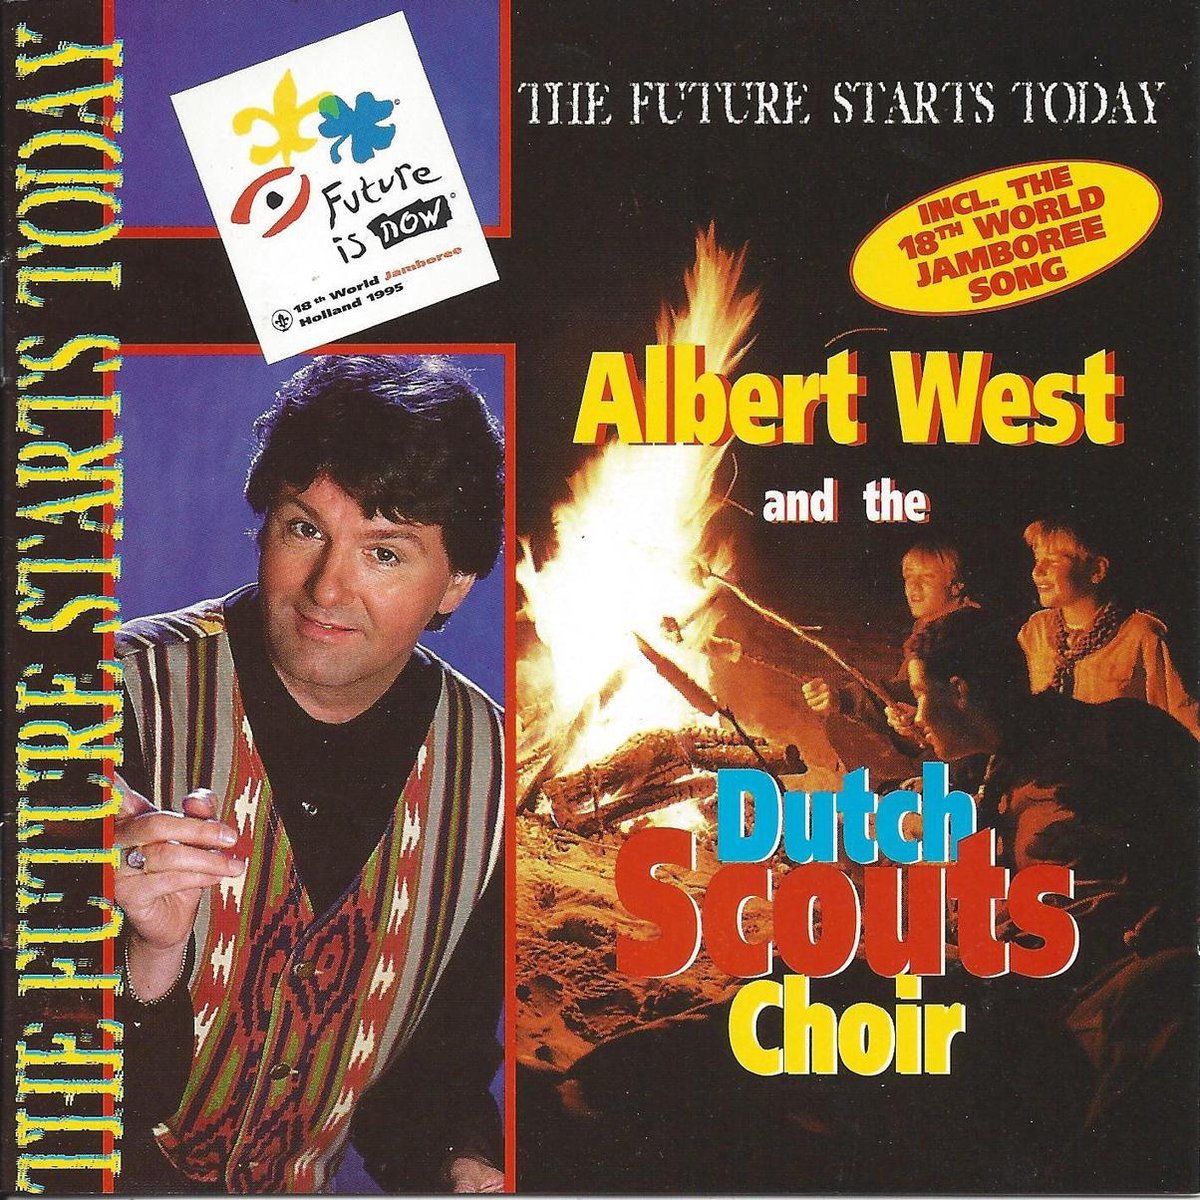 The future starts today - Albert West